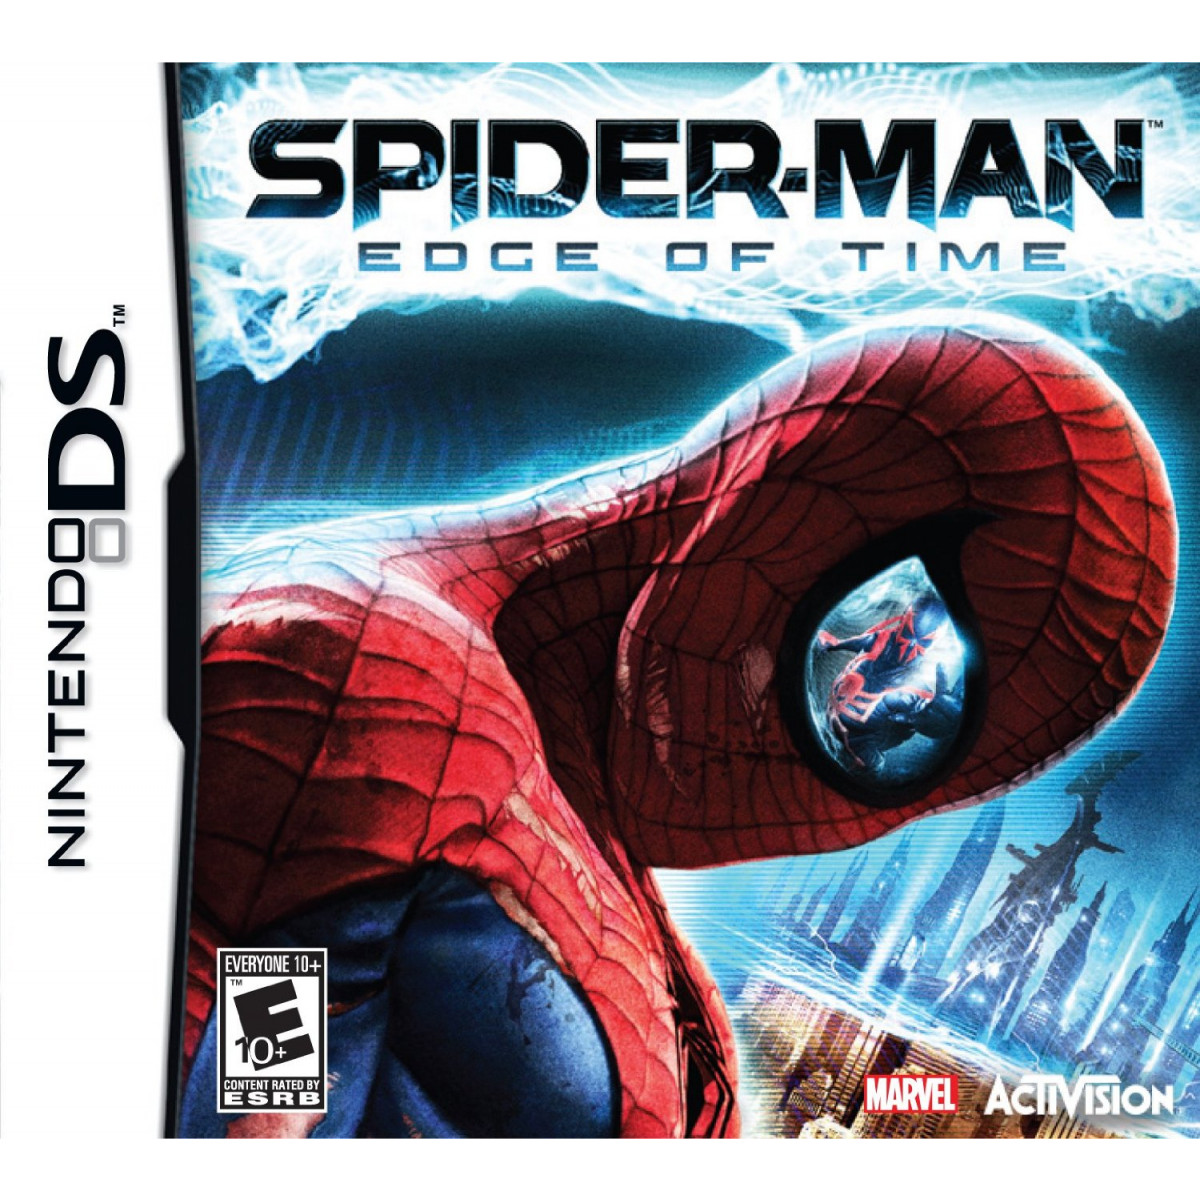 activision-spiderman-edge-of-time-nintendo-ds